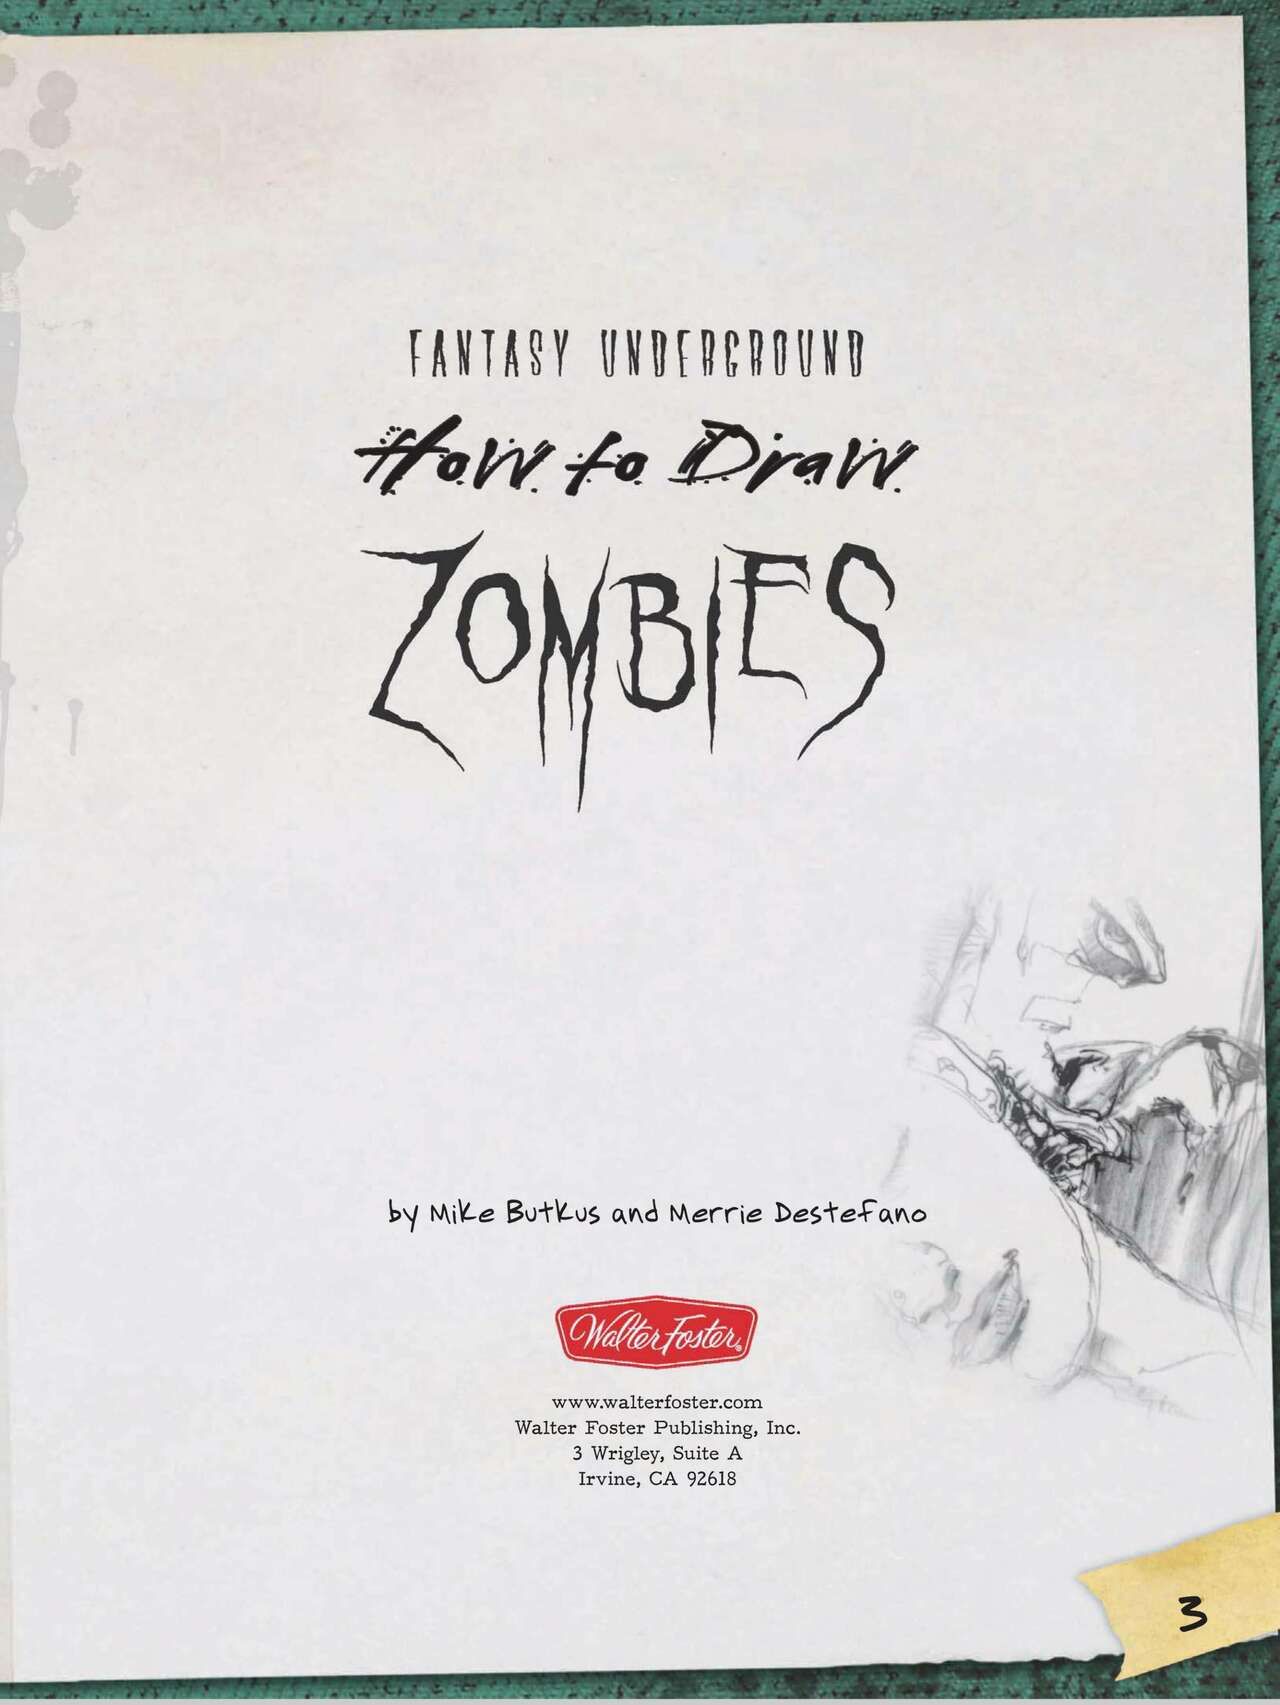 How to Draw Zombies: Discover the secrets to drawing, painting, and illustrating the undead 僵尸描绘集 4